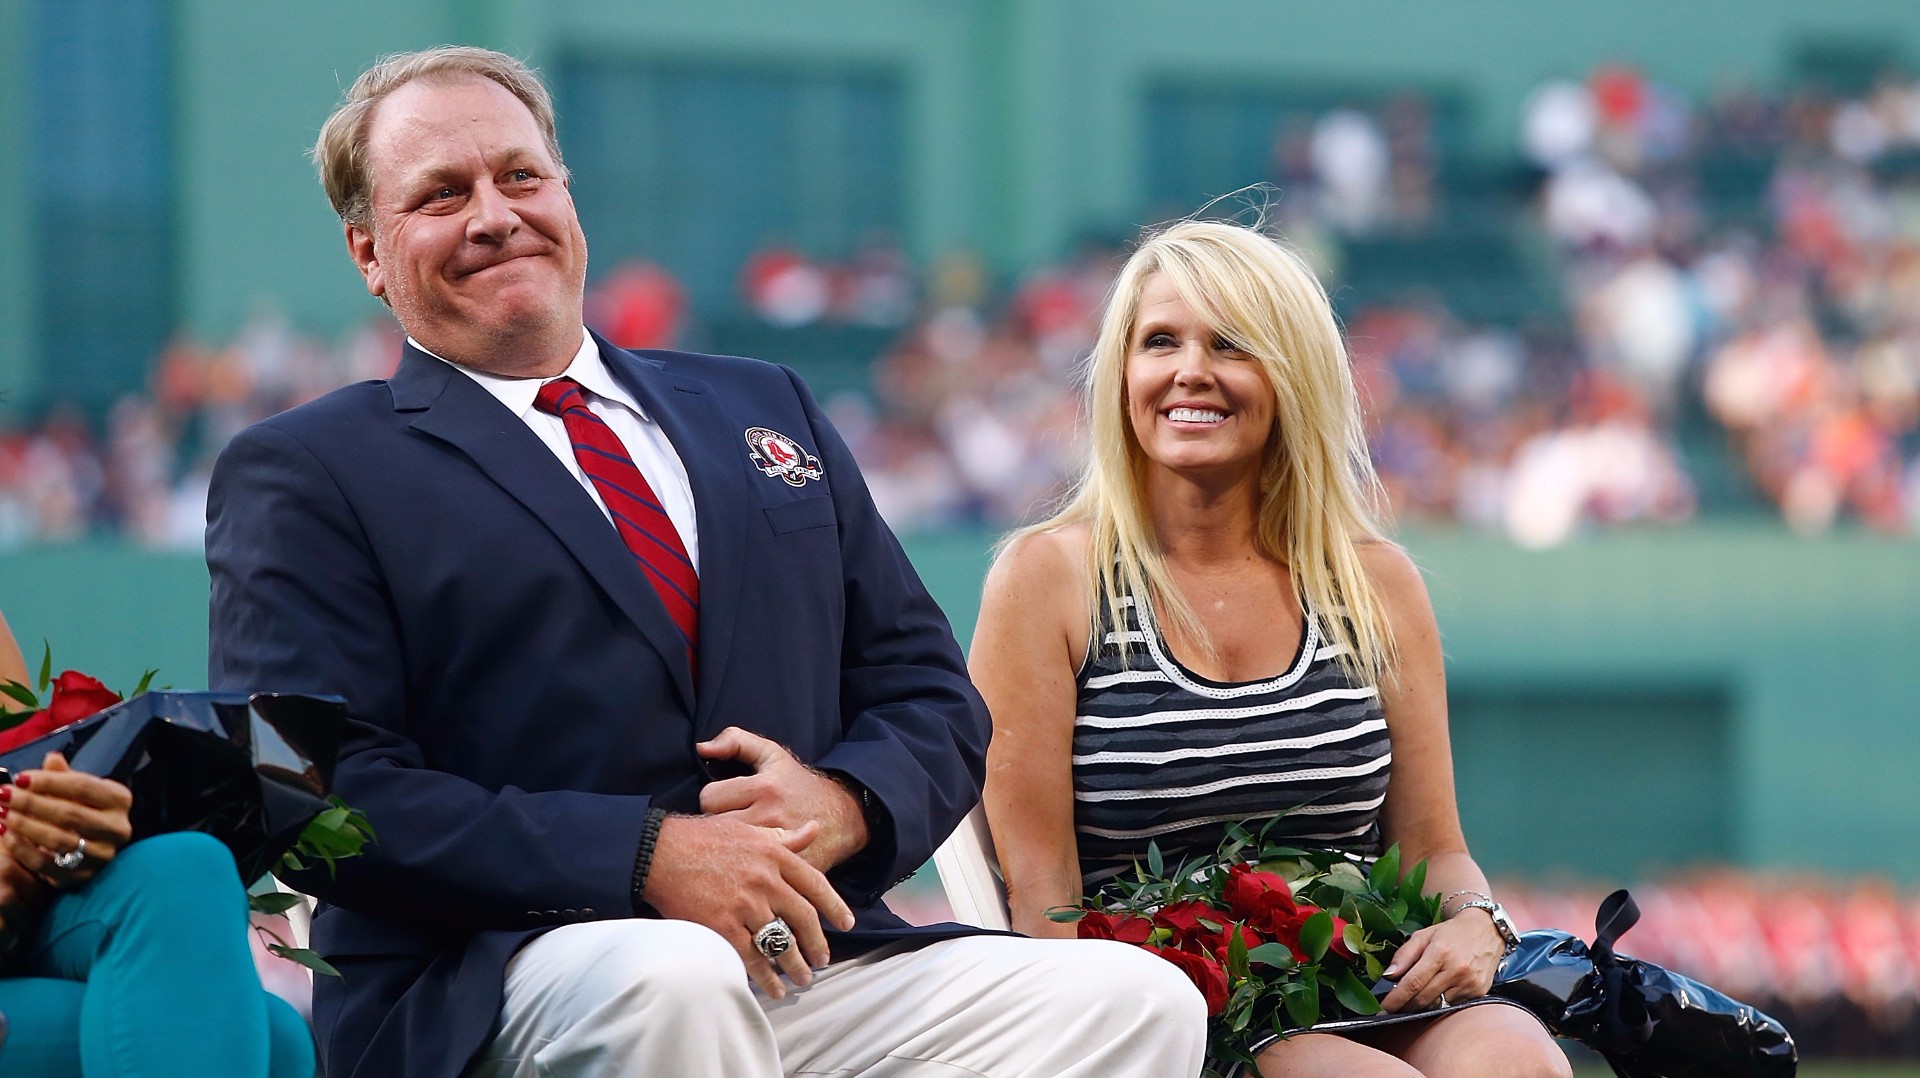 Curt Schilling defends Trump checking out 10-year-old girl, says